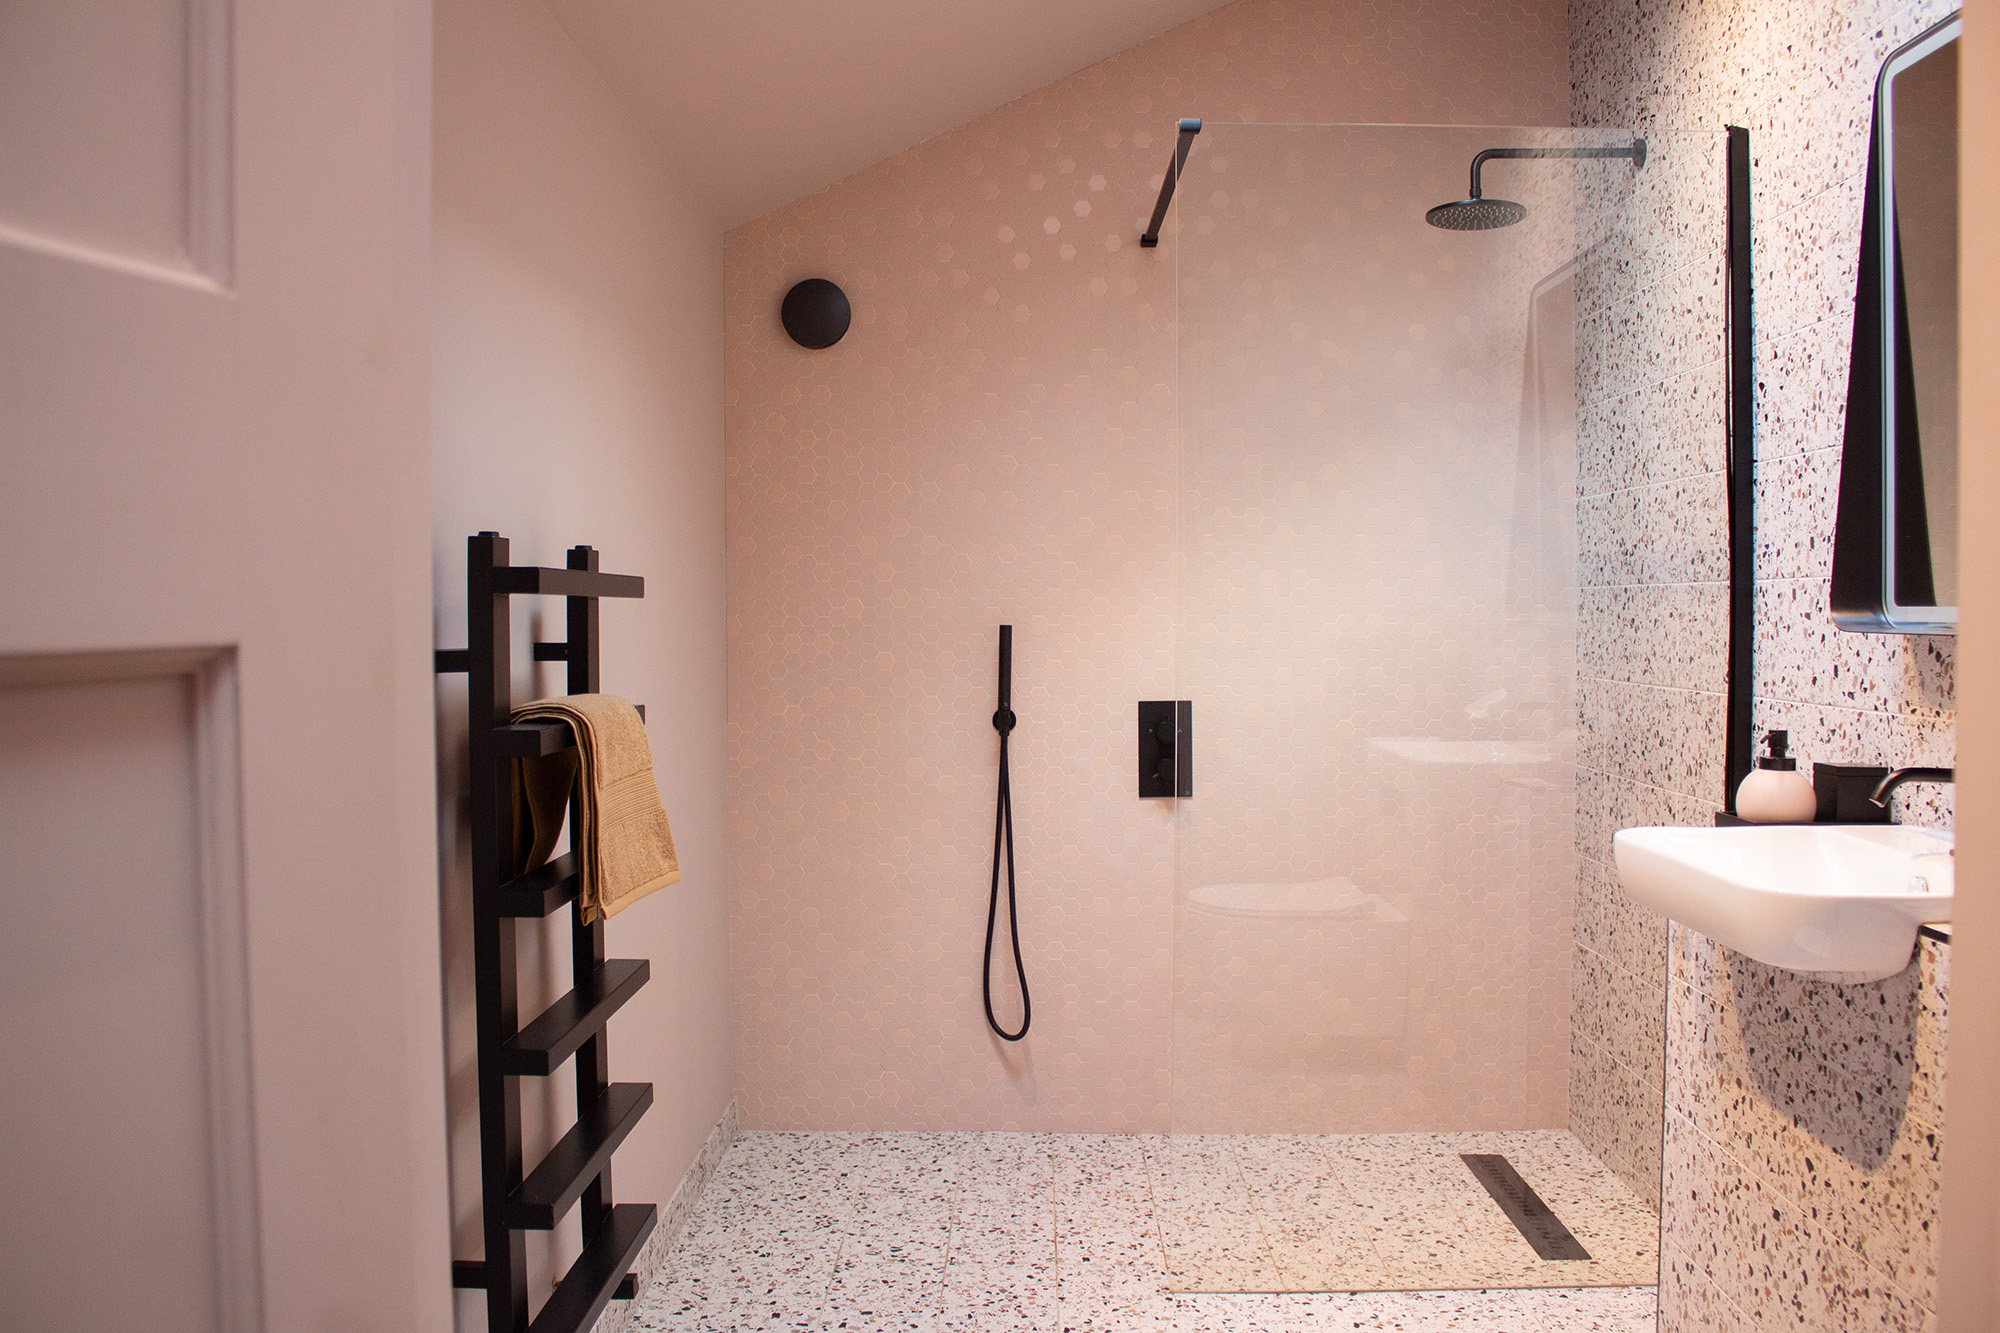 A photo of a pink bathroom with lots of space around the fuxtures.